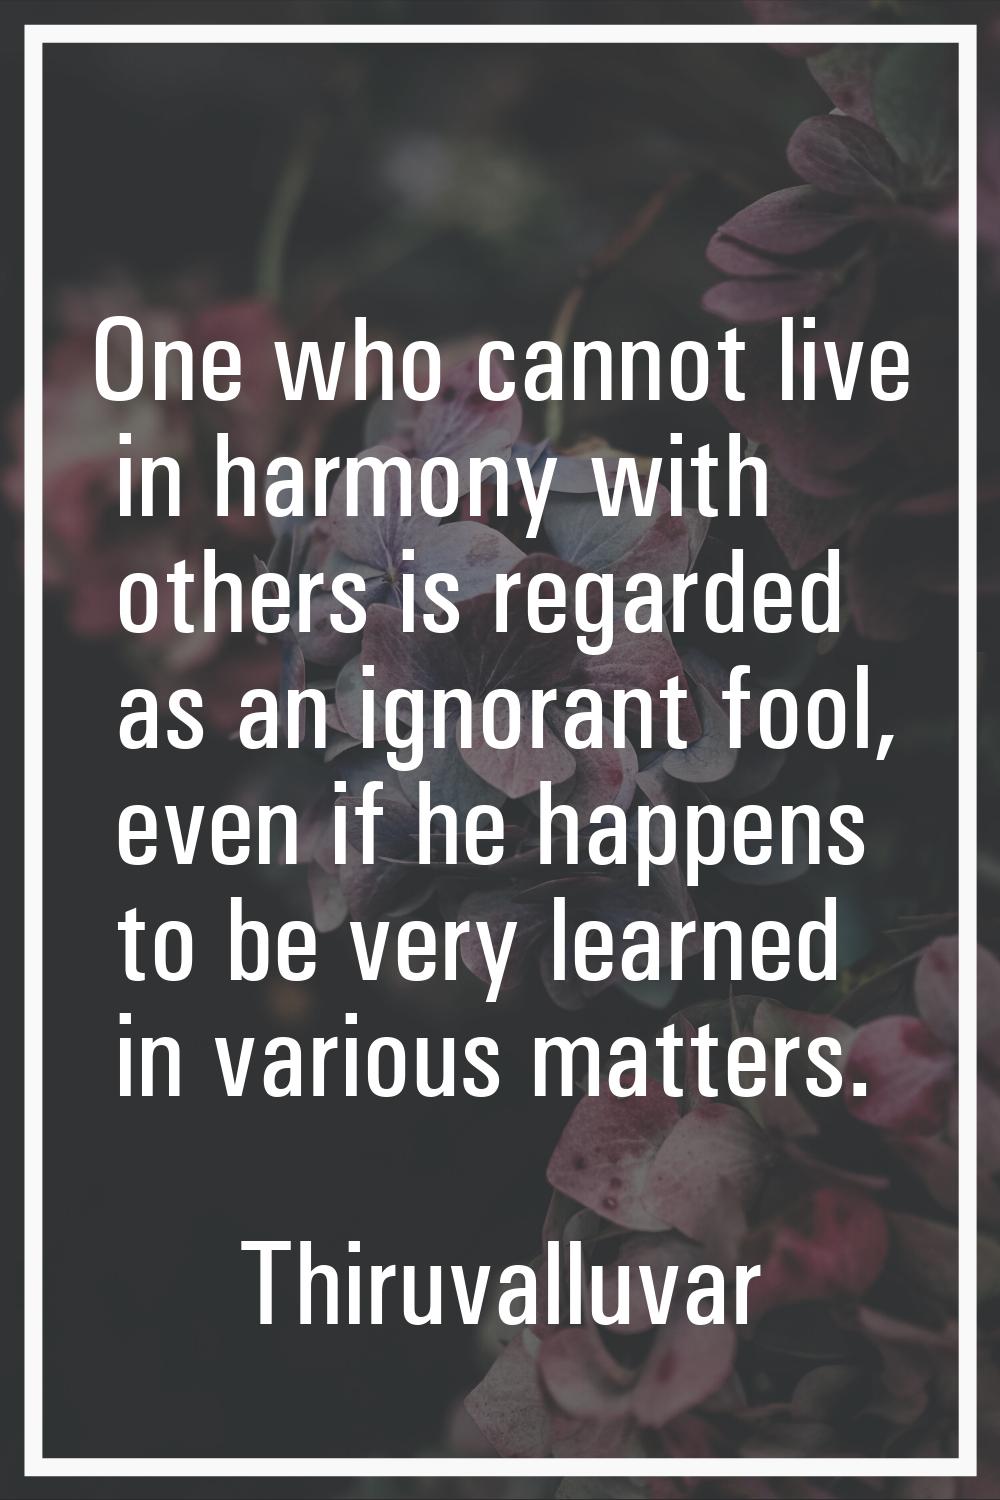 One who cannot live in harmony with others is regarded as an ignorant fool, even if he happens to b